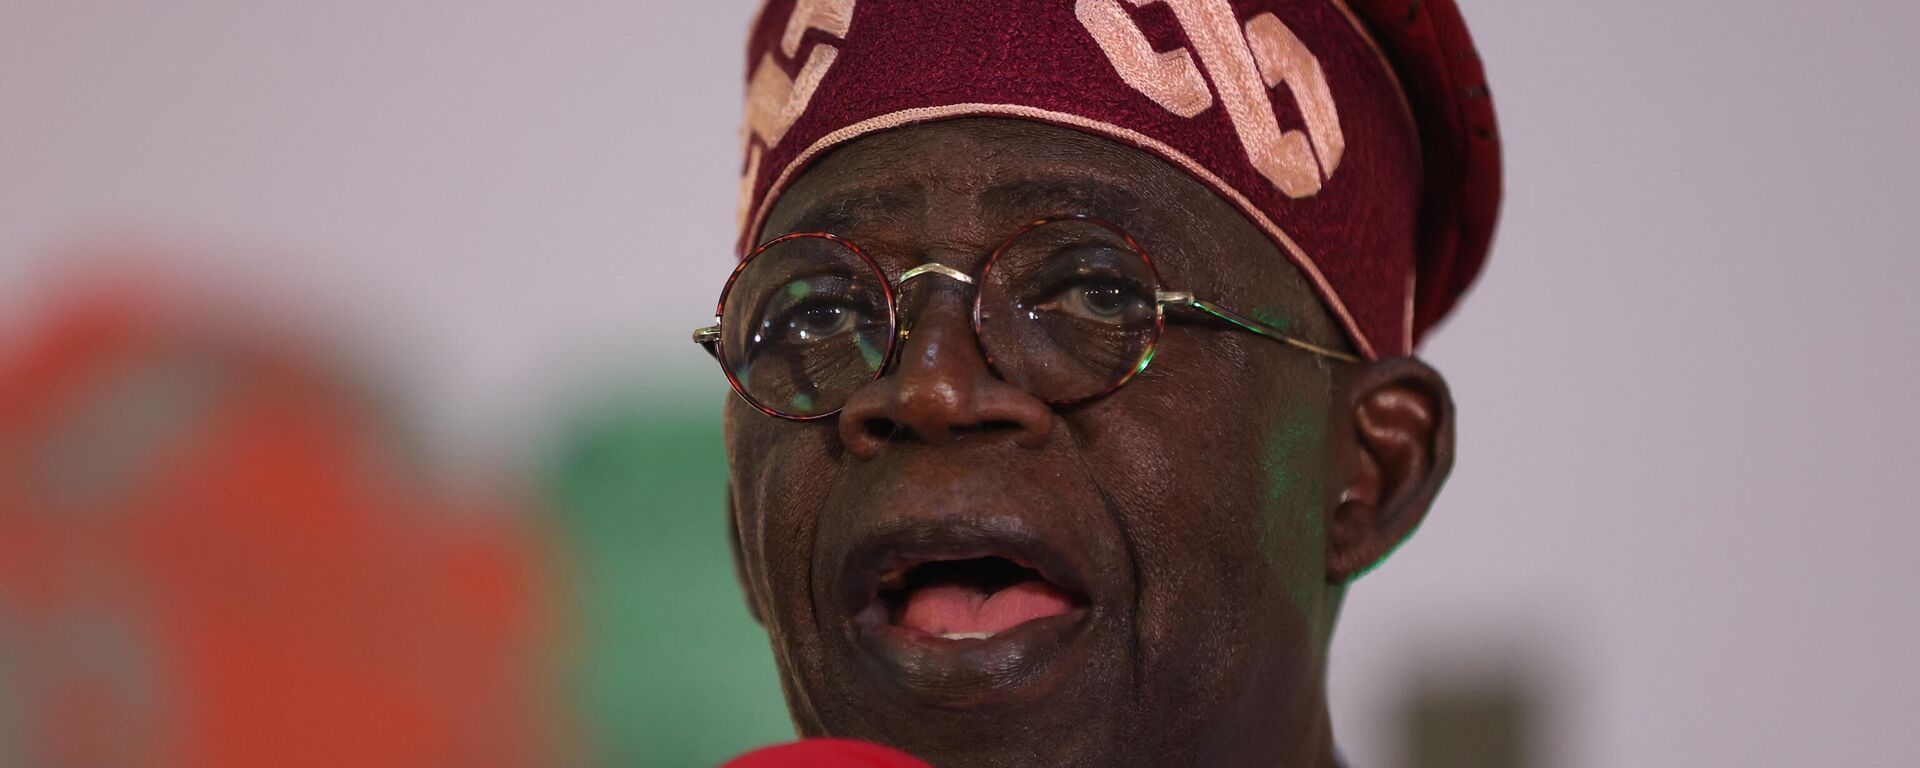 Ruling party candidate Bola Tinubu, looks on in Abuja on March 1, 2023 during celebrations at his campaign headquarters - Sputnik Africa, 1920, 29.05.2023